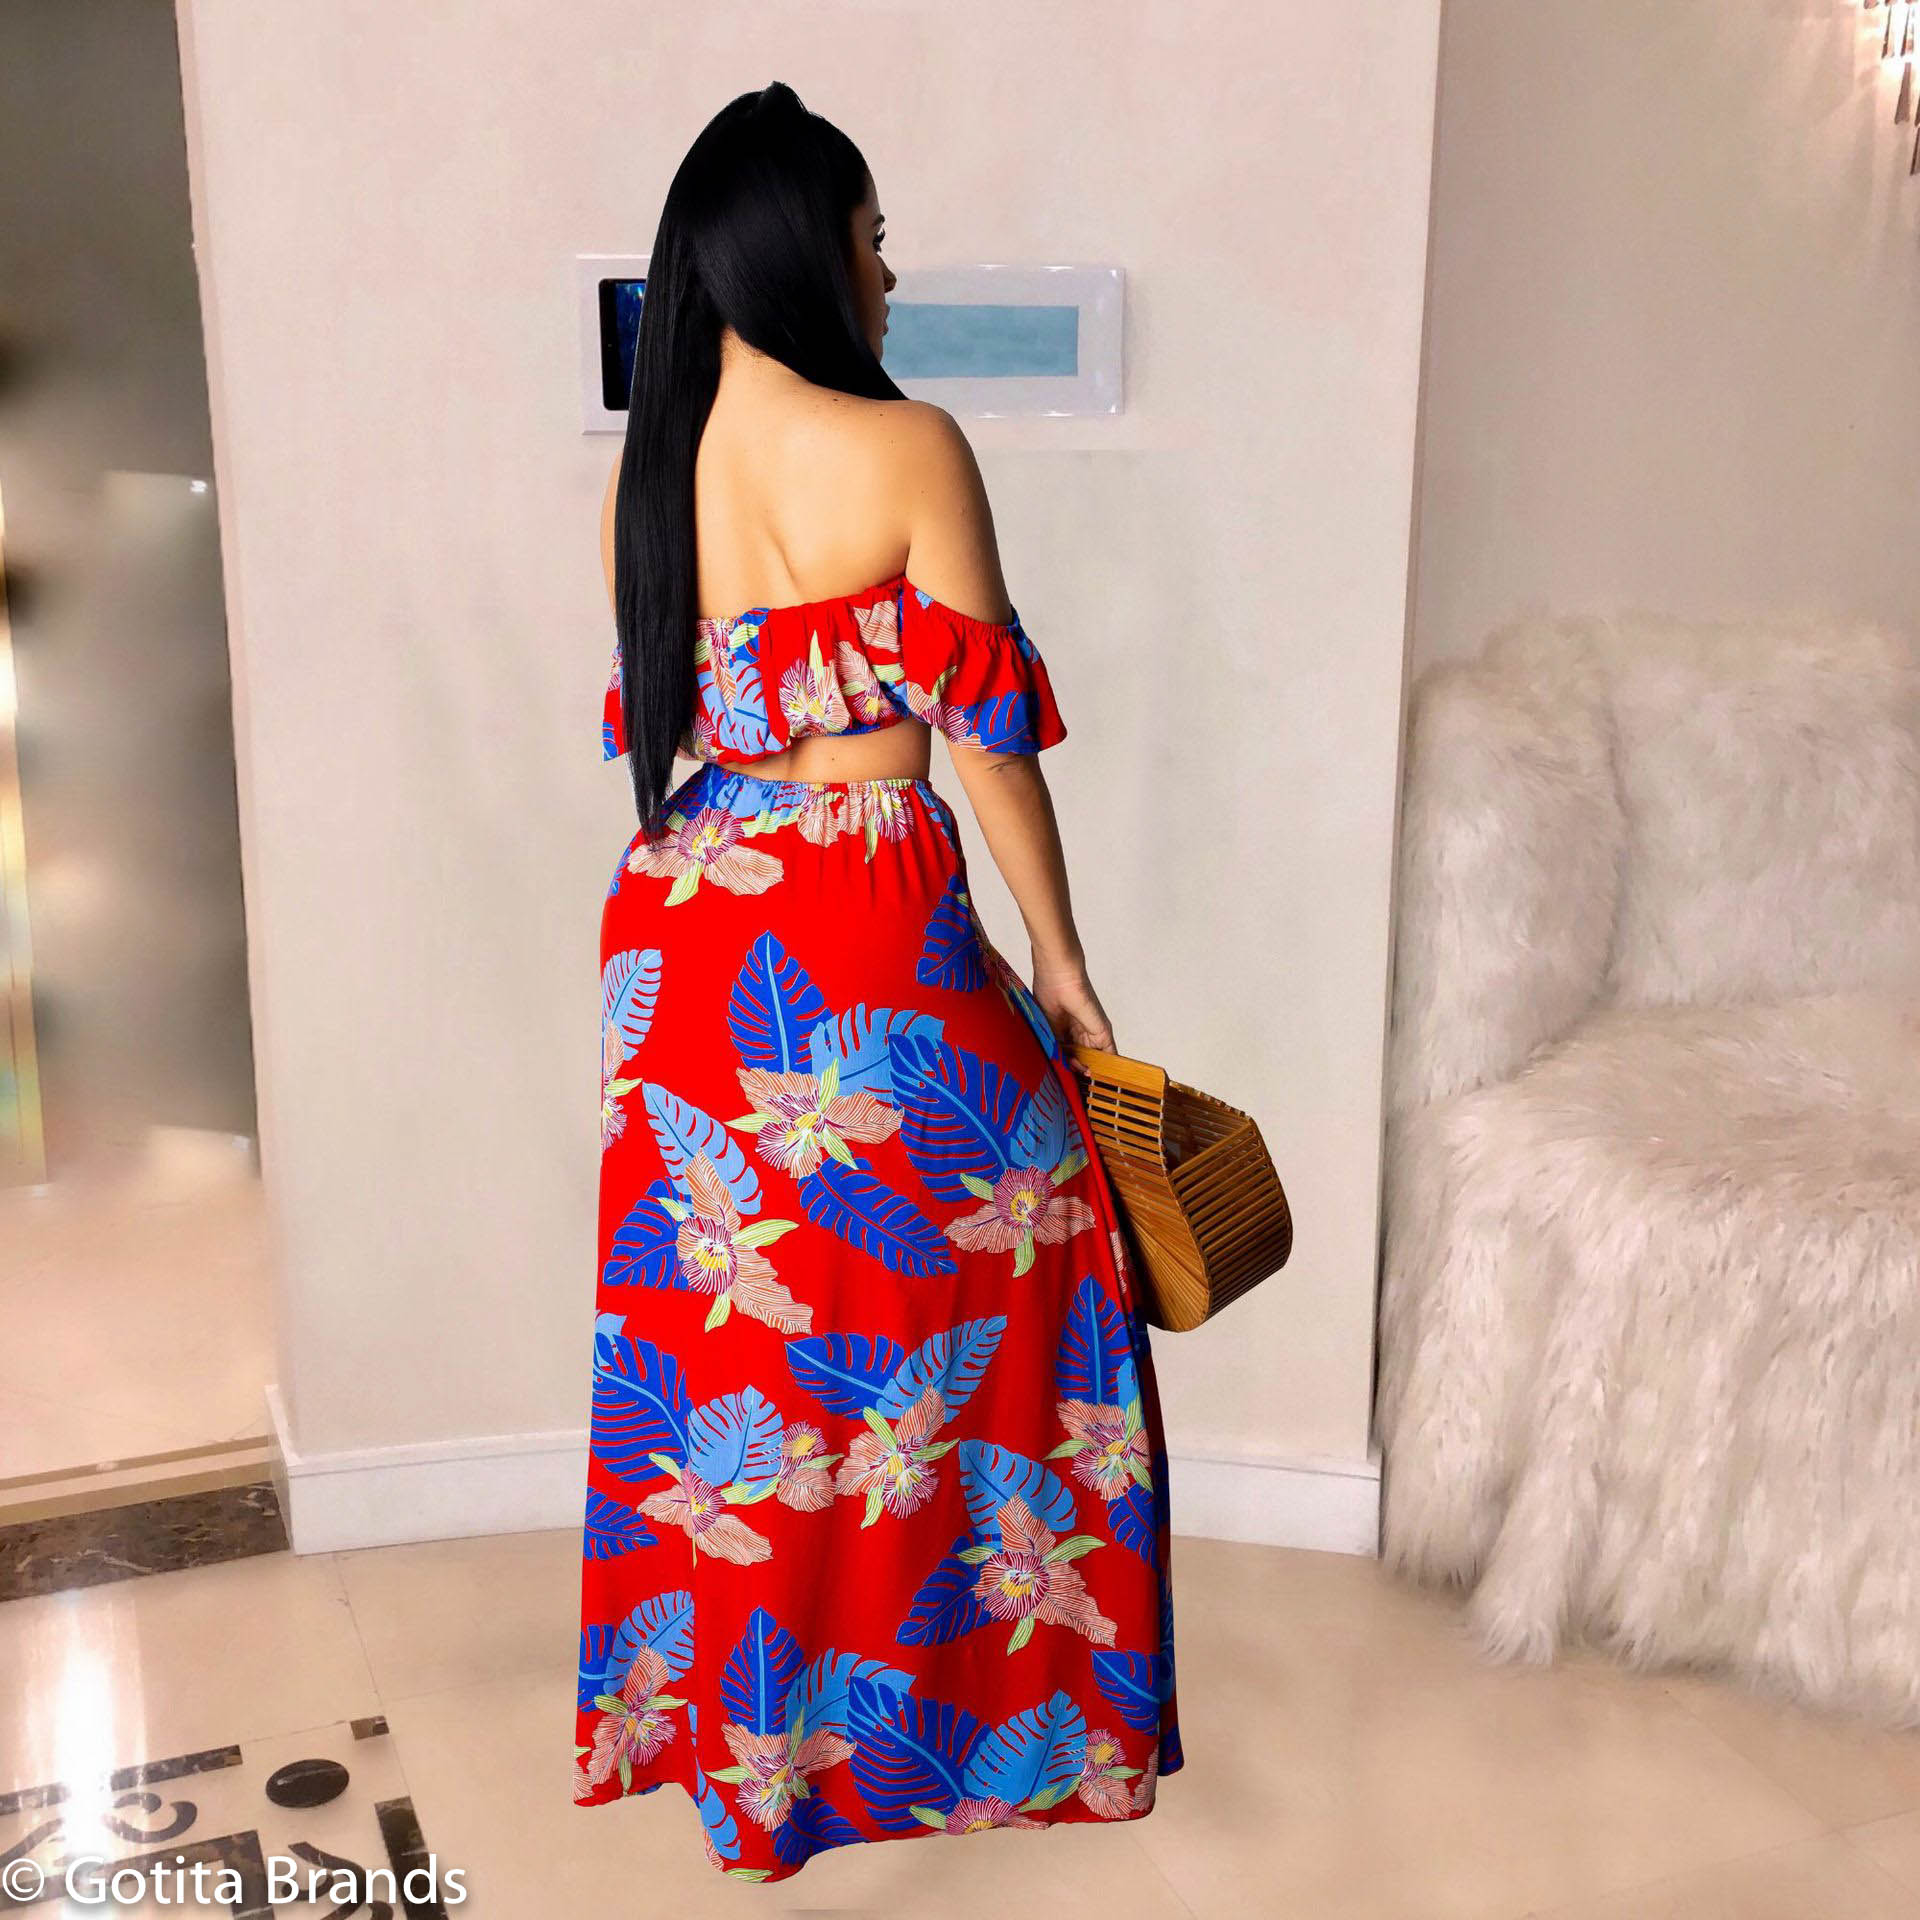 Women's Two Piece Skirt Set - Floral Print Summer Fashion - Red Dress